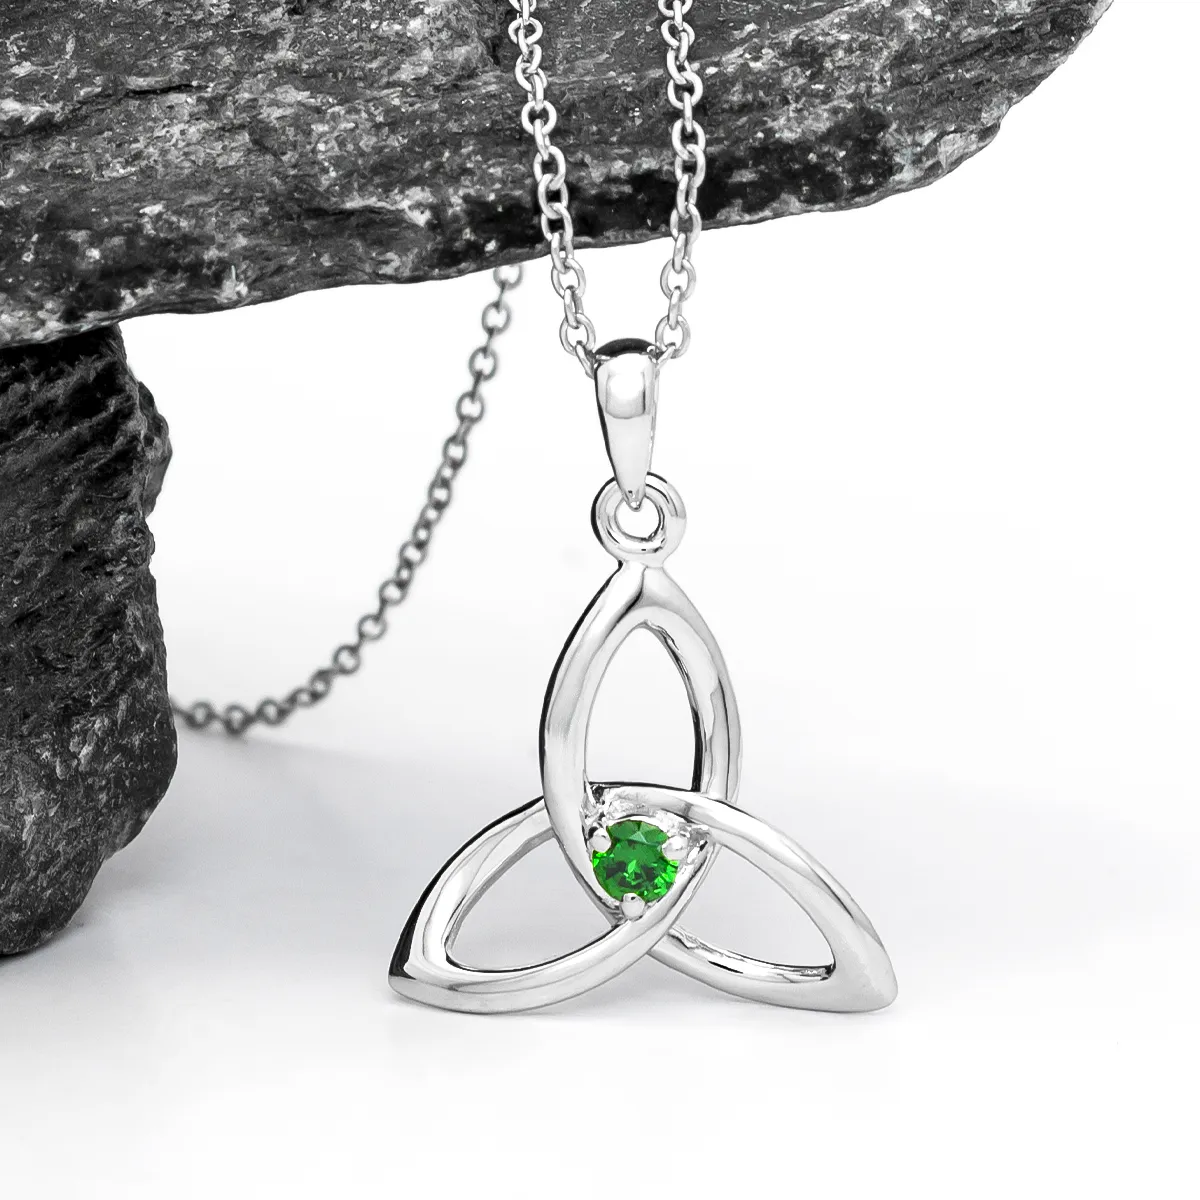 Silver Trinity Knot Necklace with Green Stone